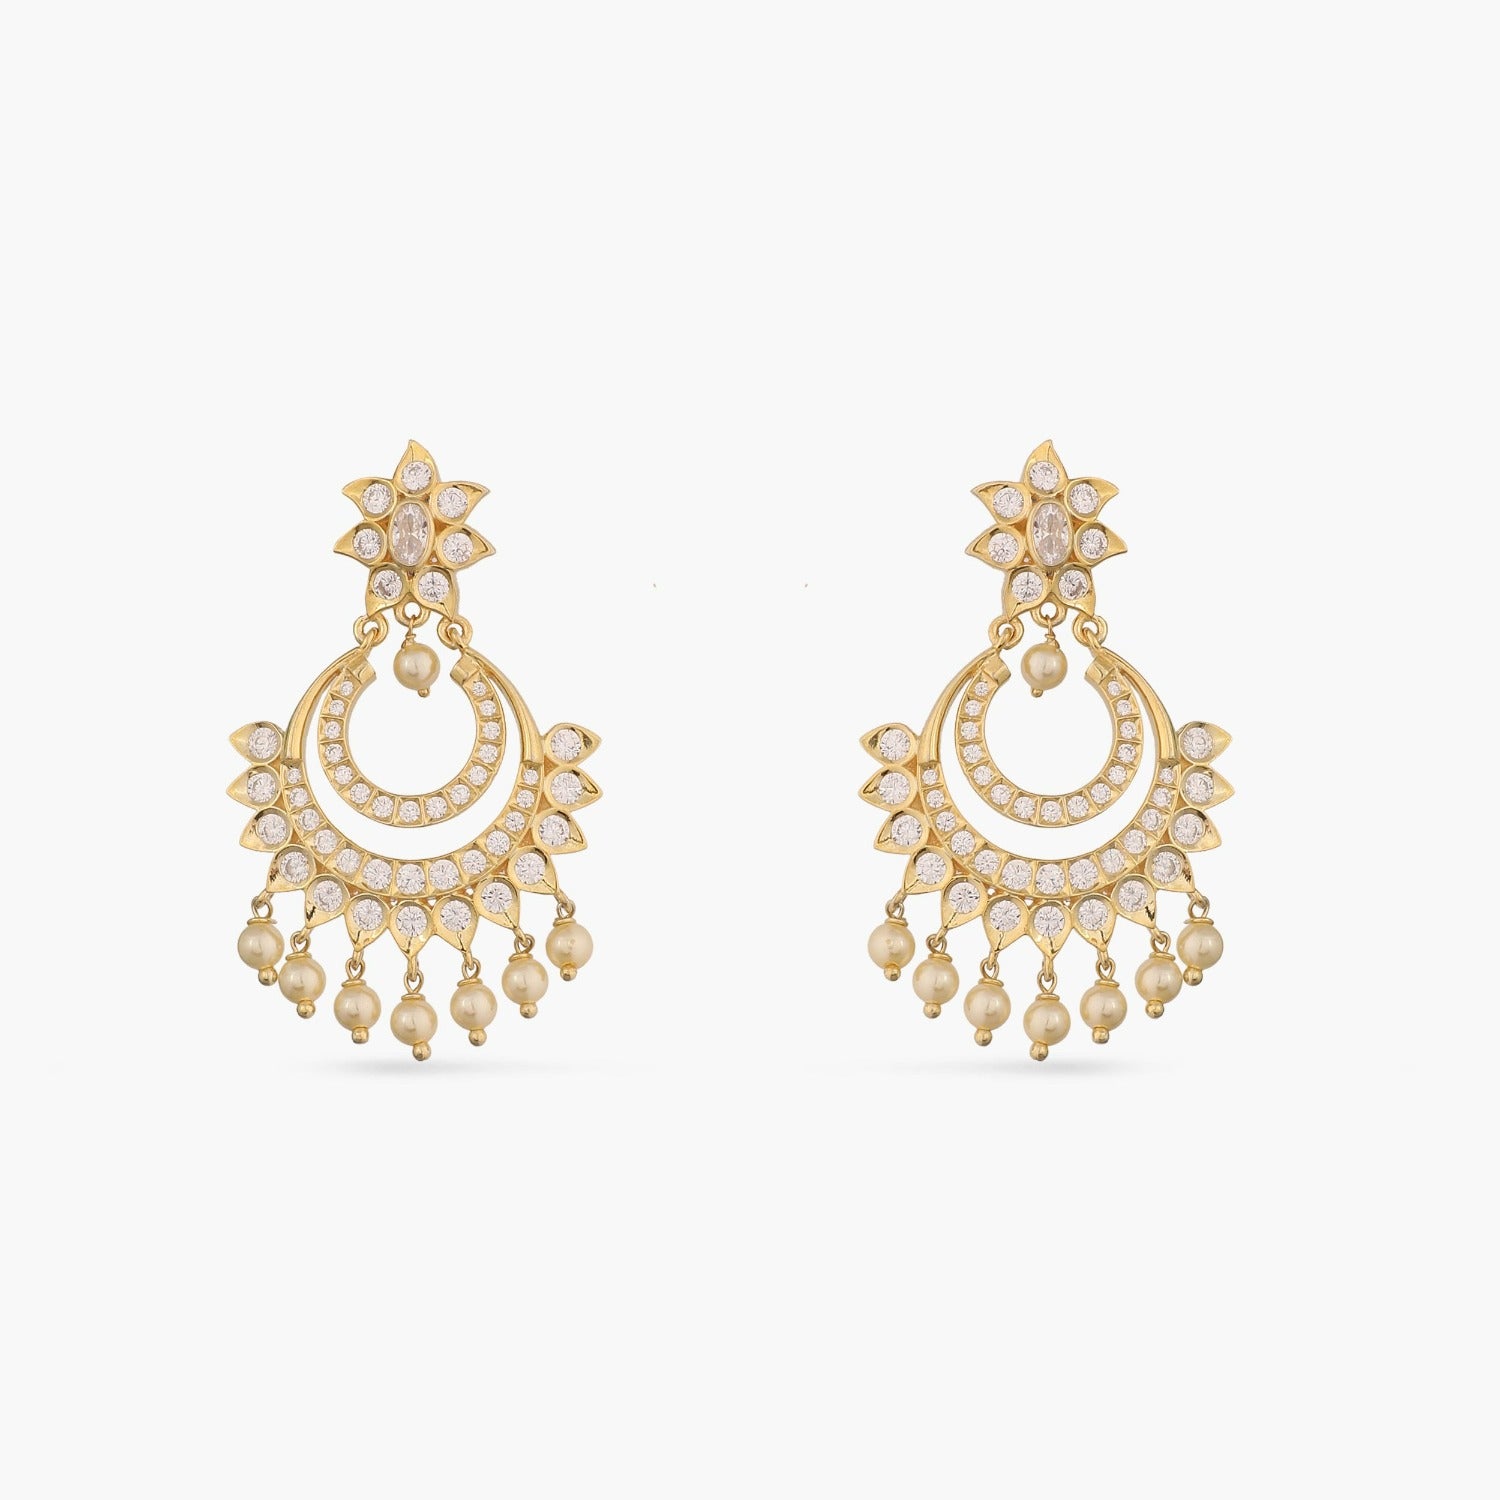 NAVRATNA EARRINGS - STERLING SILVER | Beaded jewelry, Gold jewelry fashion,  Jewelry design necklace